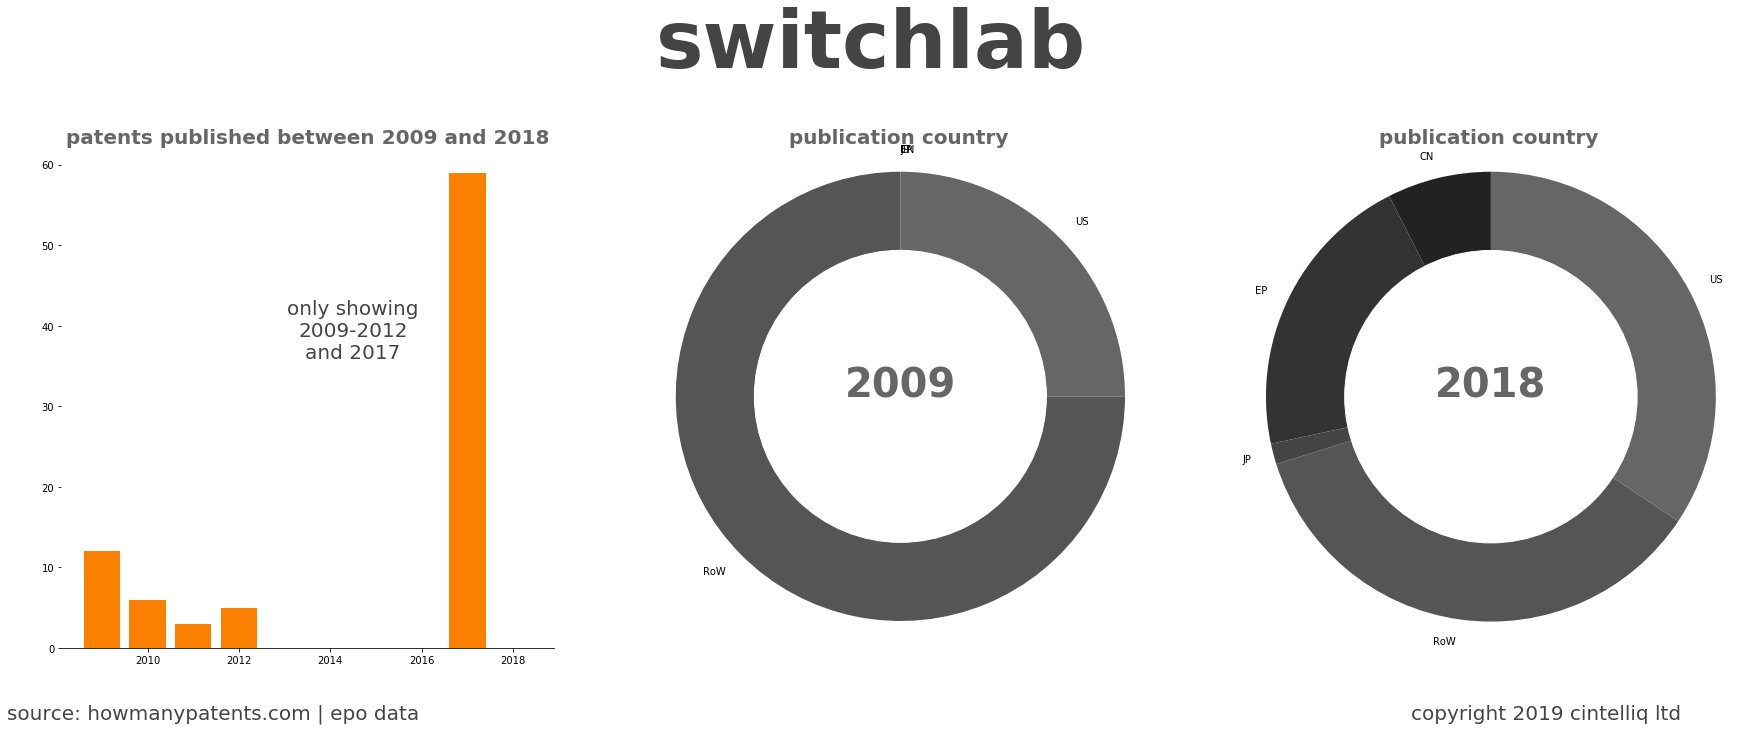 summary of patents for Switchlab